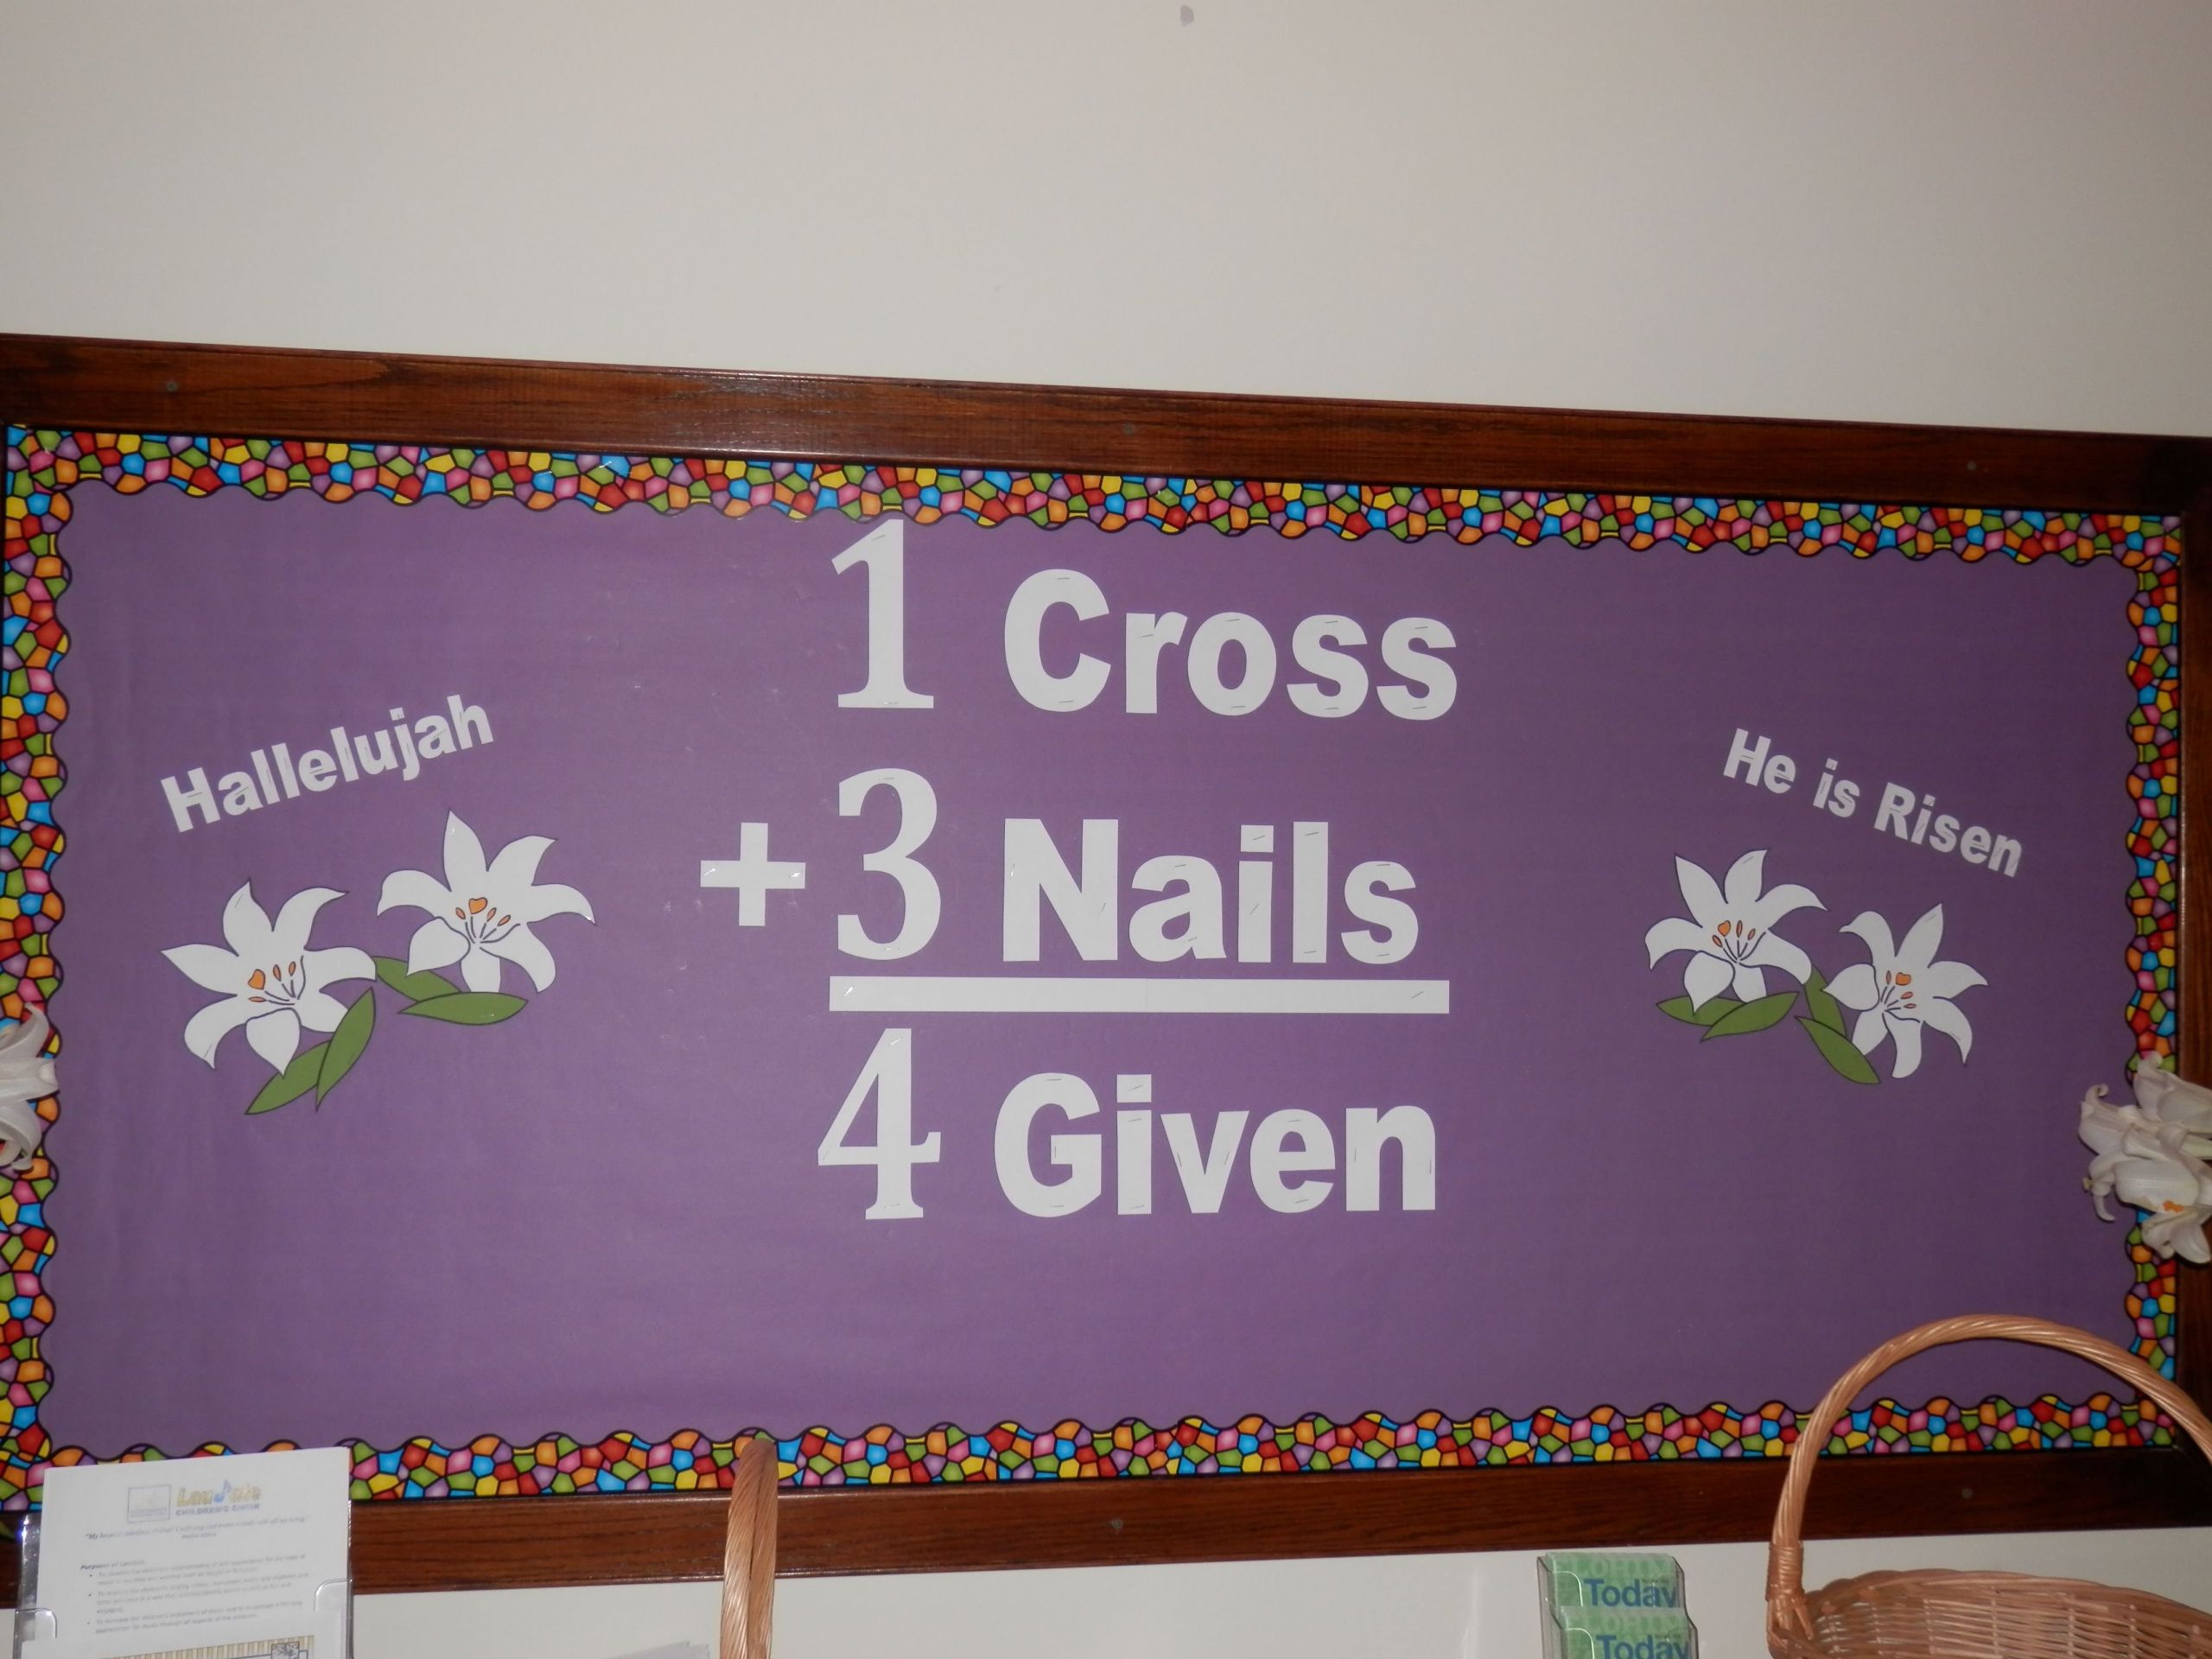 Easter Bulletin Board Ideas For Church
 10 Most Re mended Easter Bulletin Board Ideas For Church